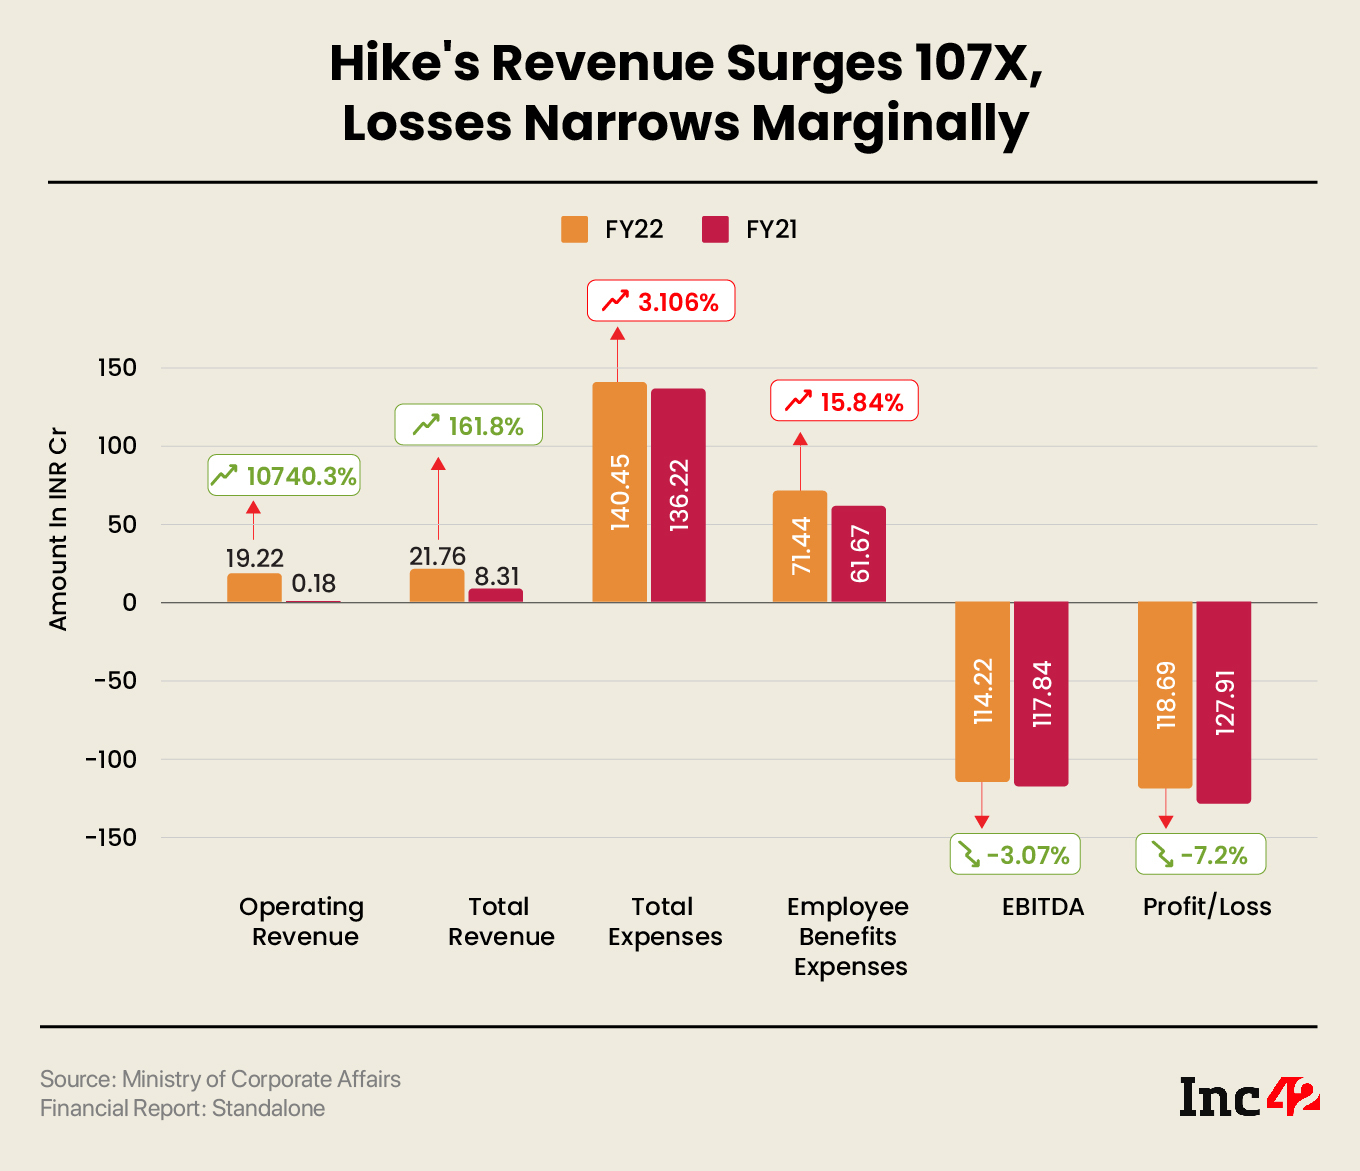 Hike Posts 107X Jump In Operating Revenue In FY22 After Pivot To Gaming; Loss Narrows 7%